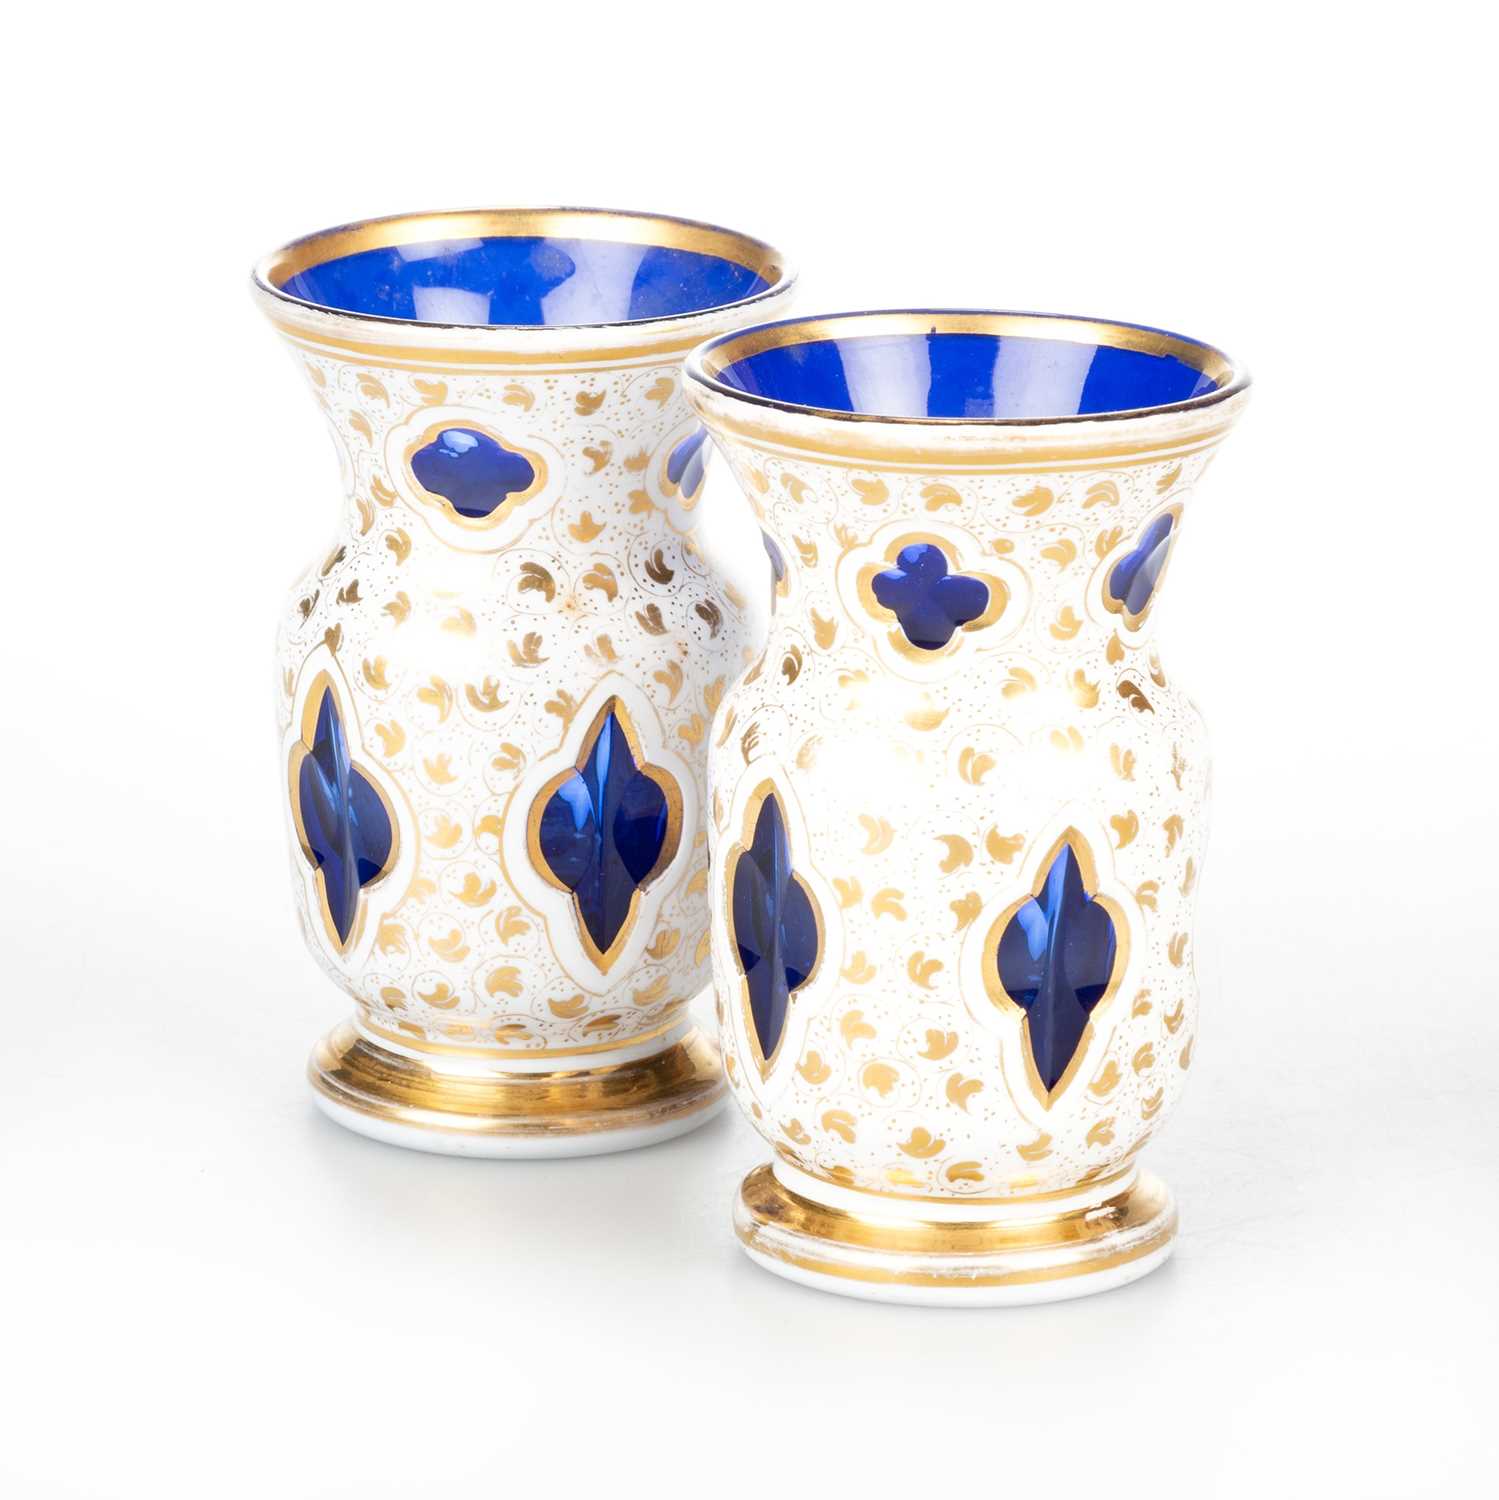 A SMALL PAIR OF 19TH CENTURY BOHEMIAN OVERLAY GLASS VASES